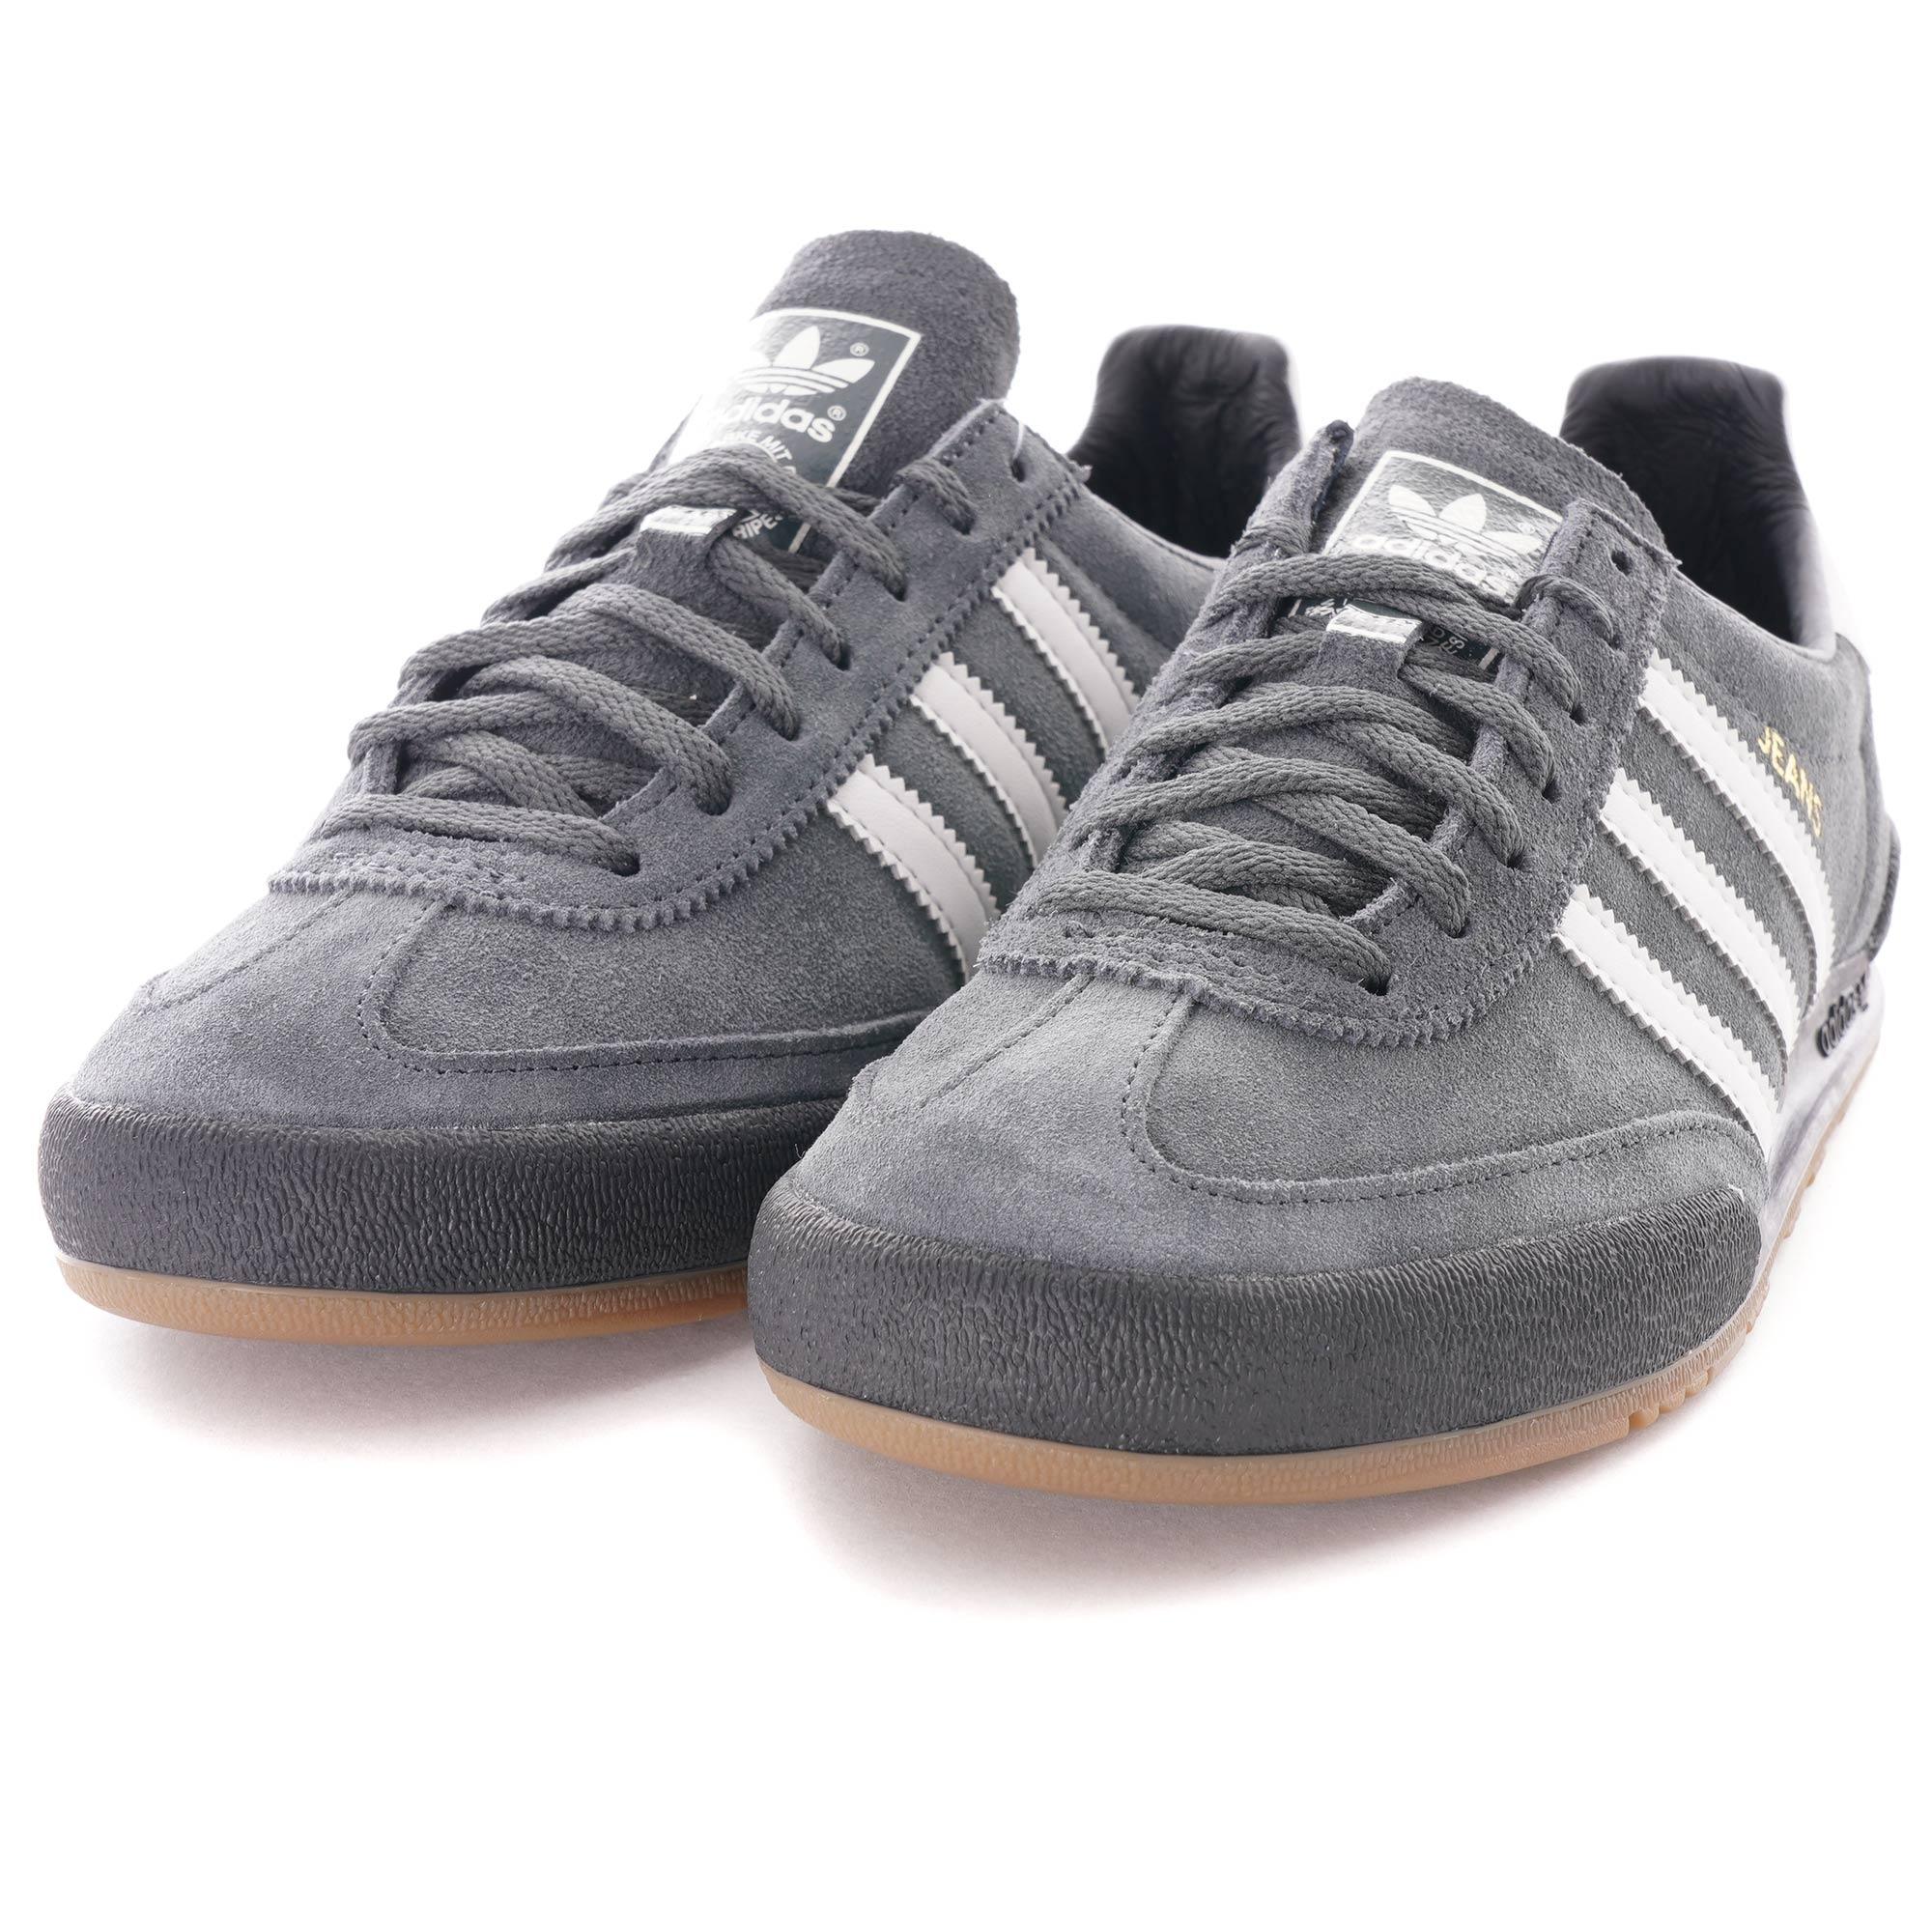 grey adidas jeans trainers